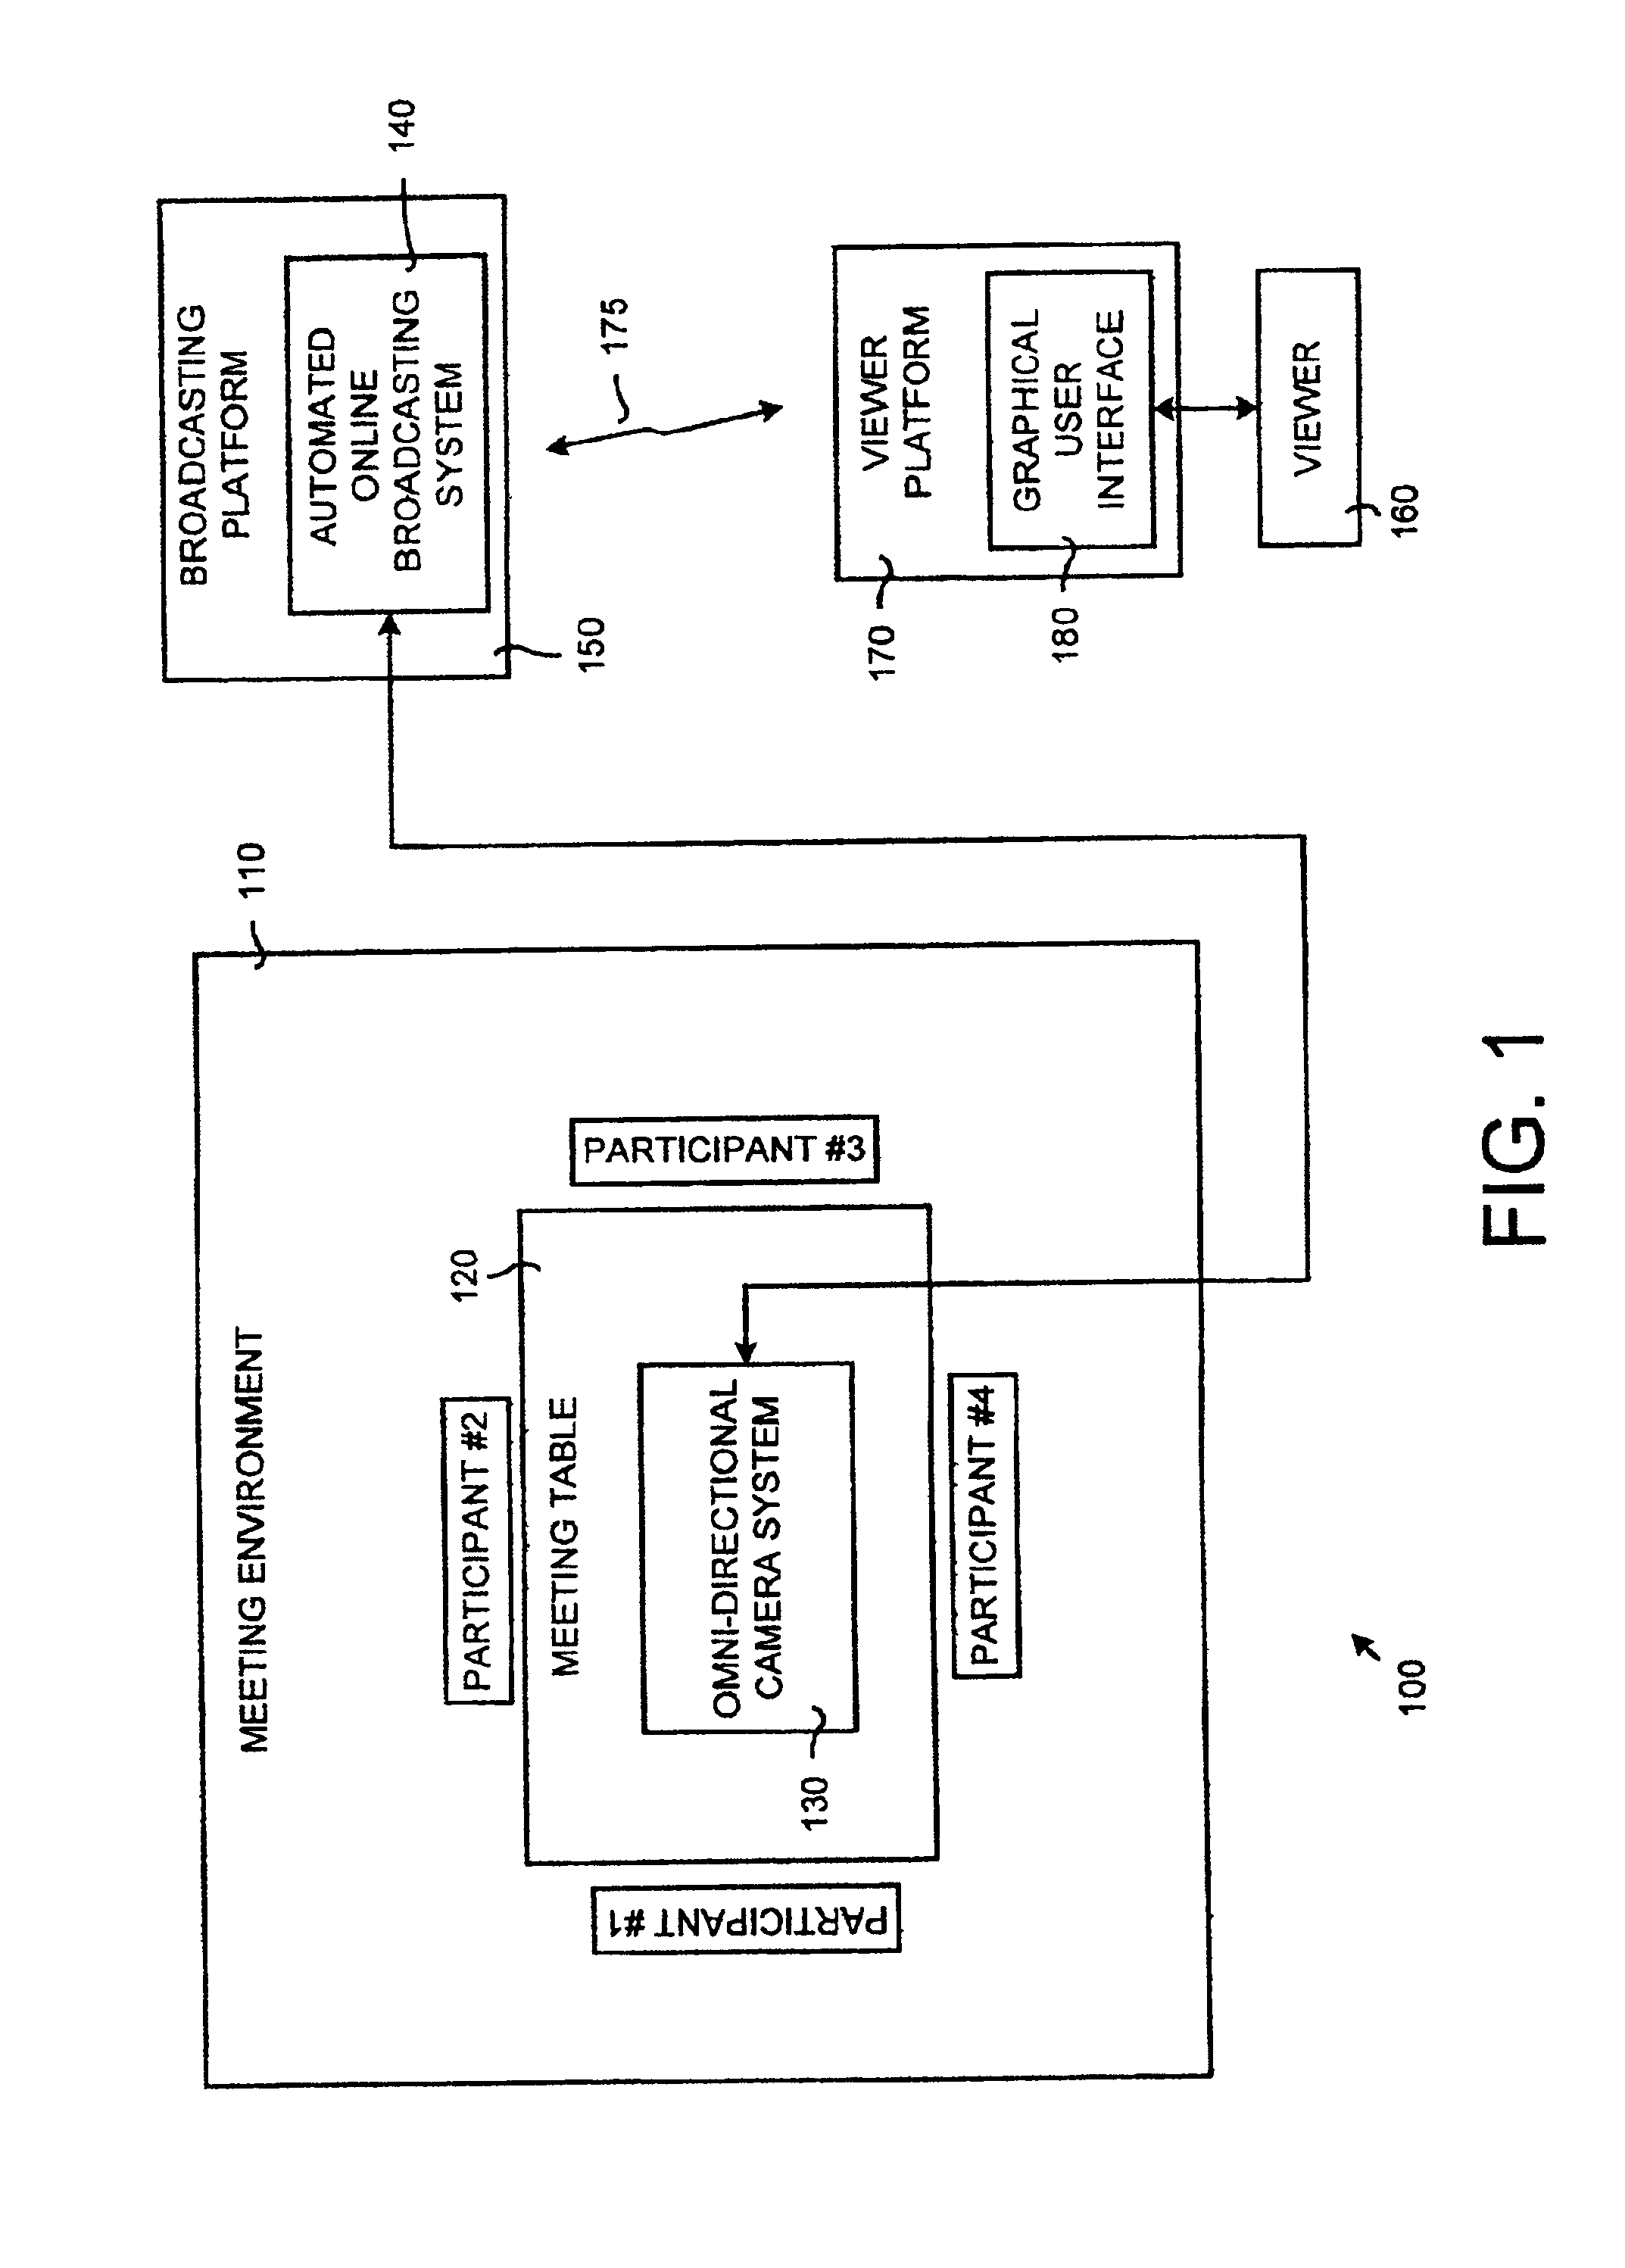 Automated online broadcasting system and method using an omni-directional camera system for viewing meetings over a computer network